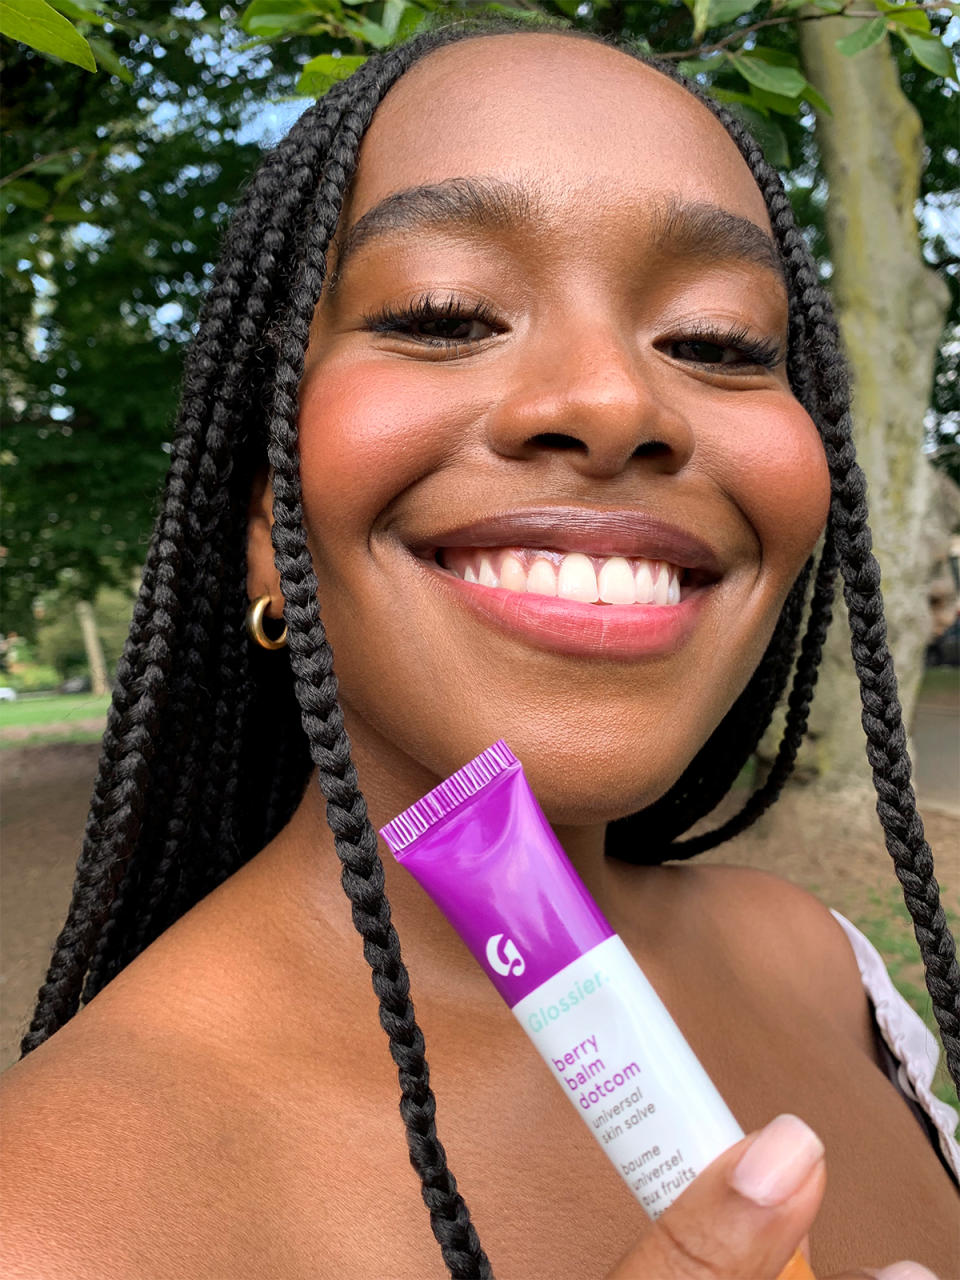 Get a moisturized pout with this lip balm that leaves subtle tint and hydrates with castor oil, beeswax and lanolin. <br /><br /><strong>Promising review:</strong> "I love, love, love this product! <strong>My lips feel so hydrated and soft and I especially adore the tinted balms!</strong> Gives your pout that perfect hint of color without being overpowering." &mdash; <a href="https://go.skimresources.com?id=38395X987171&amp;xs=1&amp;url=https%3A%2F%2Fwww.glossier.com%2Fproducts%2Fbalm-dotcom&amp;xcust=HPMagicBeauty6091b722e4b04620270cedda" target="_blank" rel="noopener noreferrer">Jennifer S.</a><br /><br /><strong>Get it from Glossier for <a href="https://go.skimresources.com?id=38395X987171&amp;xs=1&amp;url=https%3A%2F%2Fwww.glossier.com%2Fproducts%2Fbalm-dotcom&amp;xcust=HPMagicBeauty6091b722e4b04620270cedda" target="_blank" rel="nofollow noopener noreferrer" data-skimlinks-tracking="5906615" data-vars-affiliate="glossier.79ic8e.net" data-vars-campaign="BeautyProductsCouldBeMagicSuazo3-25-21-5906615-" data-vars-href="https://glossier.79ic8e.net/c/468058/431612/7573?subId1=BeautyProductsCouldBeMagicSuazo3-25-21-5906615-&amp;u=https%3A%2F%2Fwww.glossier.com%2Fproducts%2Fbalm-dotcom" data-vars-keywords="skincare" data-vars-link-id="16602648" data-vars-price="" data-vars-product-id="21069736" data-vars-product-img="https://images.ctfassets.net/p3w8f4svwgcg/1yt40Xo3lutuTjlJwCmcRc/b8bfbbcbb4bf2605c53e50068d57dd8f/axgc207Q.jpeg?w=1400&amp;q=80&amp;fm=webp" data-vars-product-title="Balm Dotcom" data-vars-redirecturl="https://www.glossier.com/products/balm-dotcom" data-vars-retailers="Glossier,glossier" data-ml-dynamic="true" data-ml-dynamic-type="sl" data-orig-url="https://glossier.79ic8e.net/c/468058/431612/7573?subId1=BeautyProductsCouldBeMagicSuazo3-25-21-5906615-&amp;u=https%3A%2F%2Fwww.glossier.com%2Fproducts%2Fbalm-dotcom" data-ml-id="32">$12</a> (available in eight shades/scents).</strong>